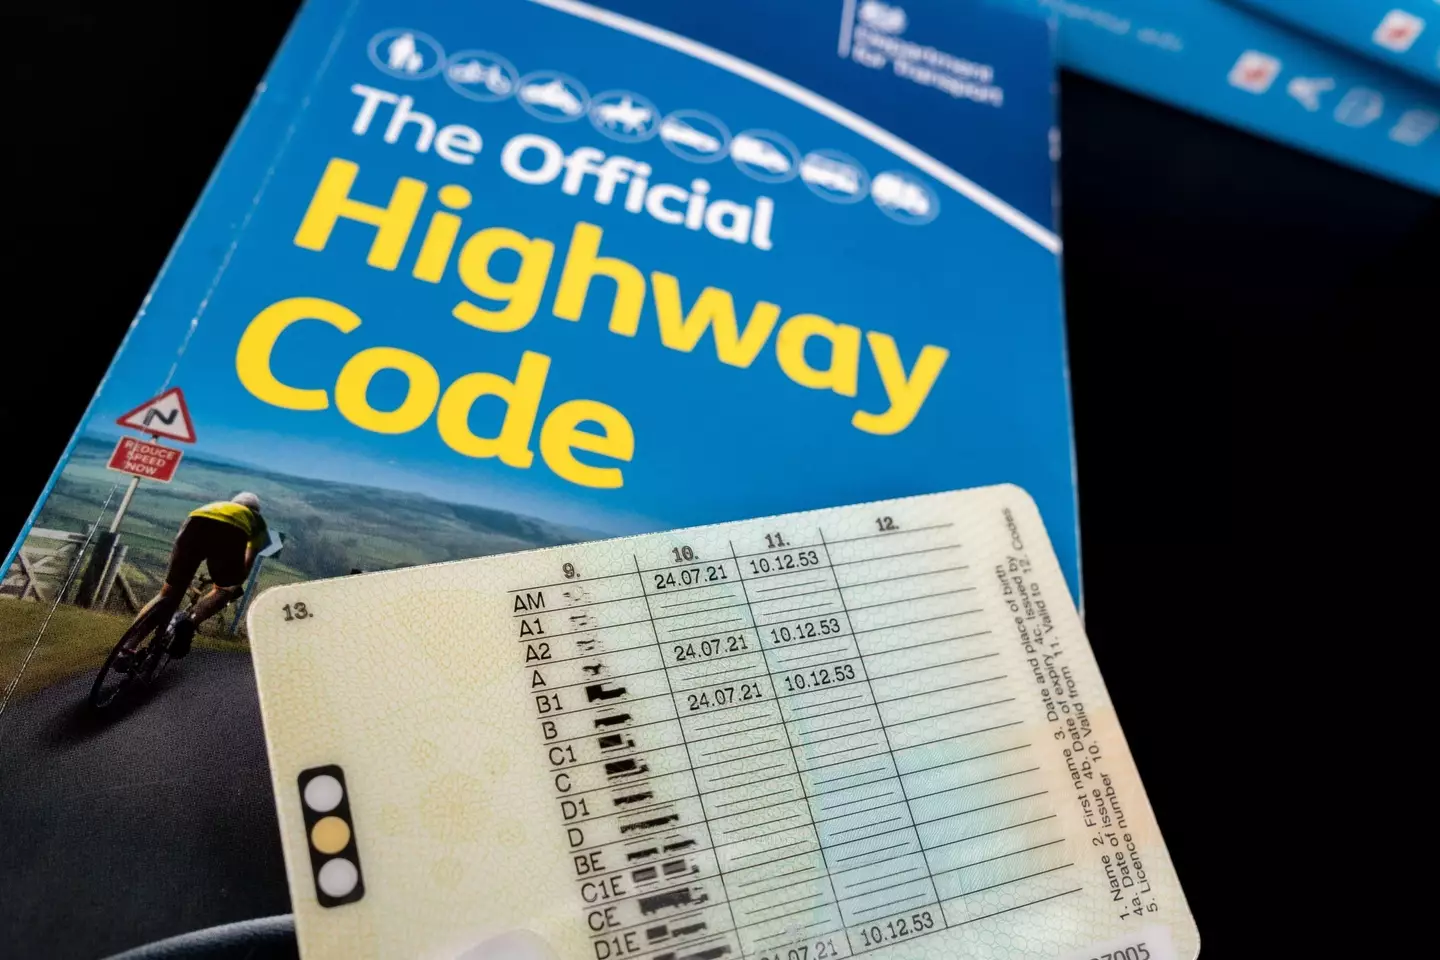 It's time to start brushing on the new laws in The Highway Code.